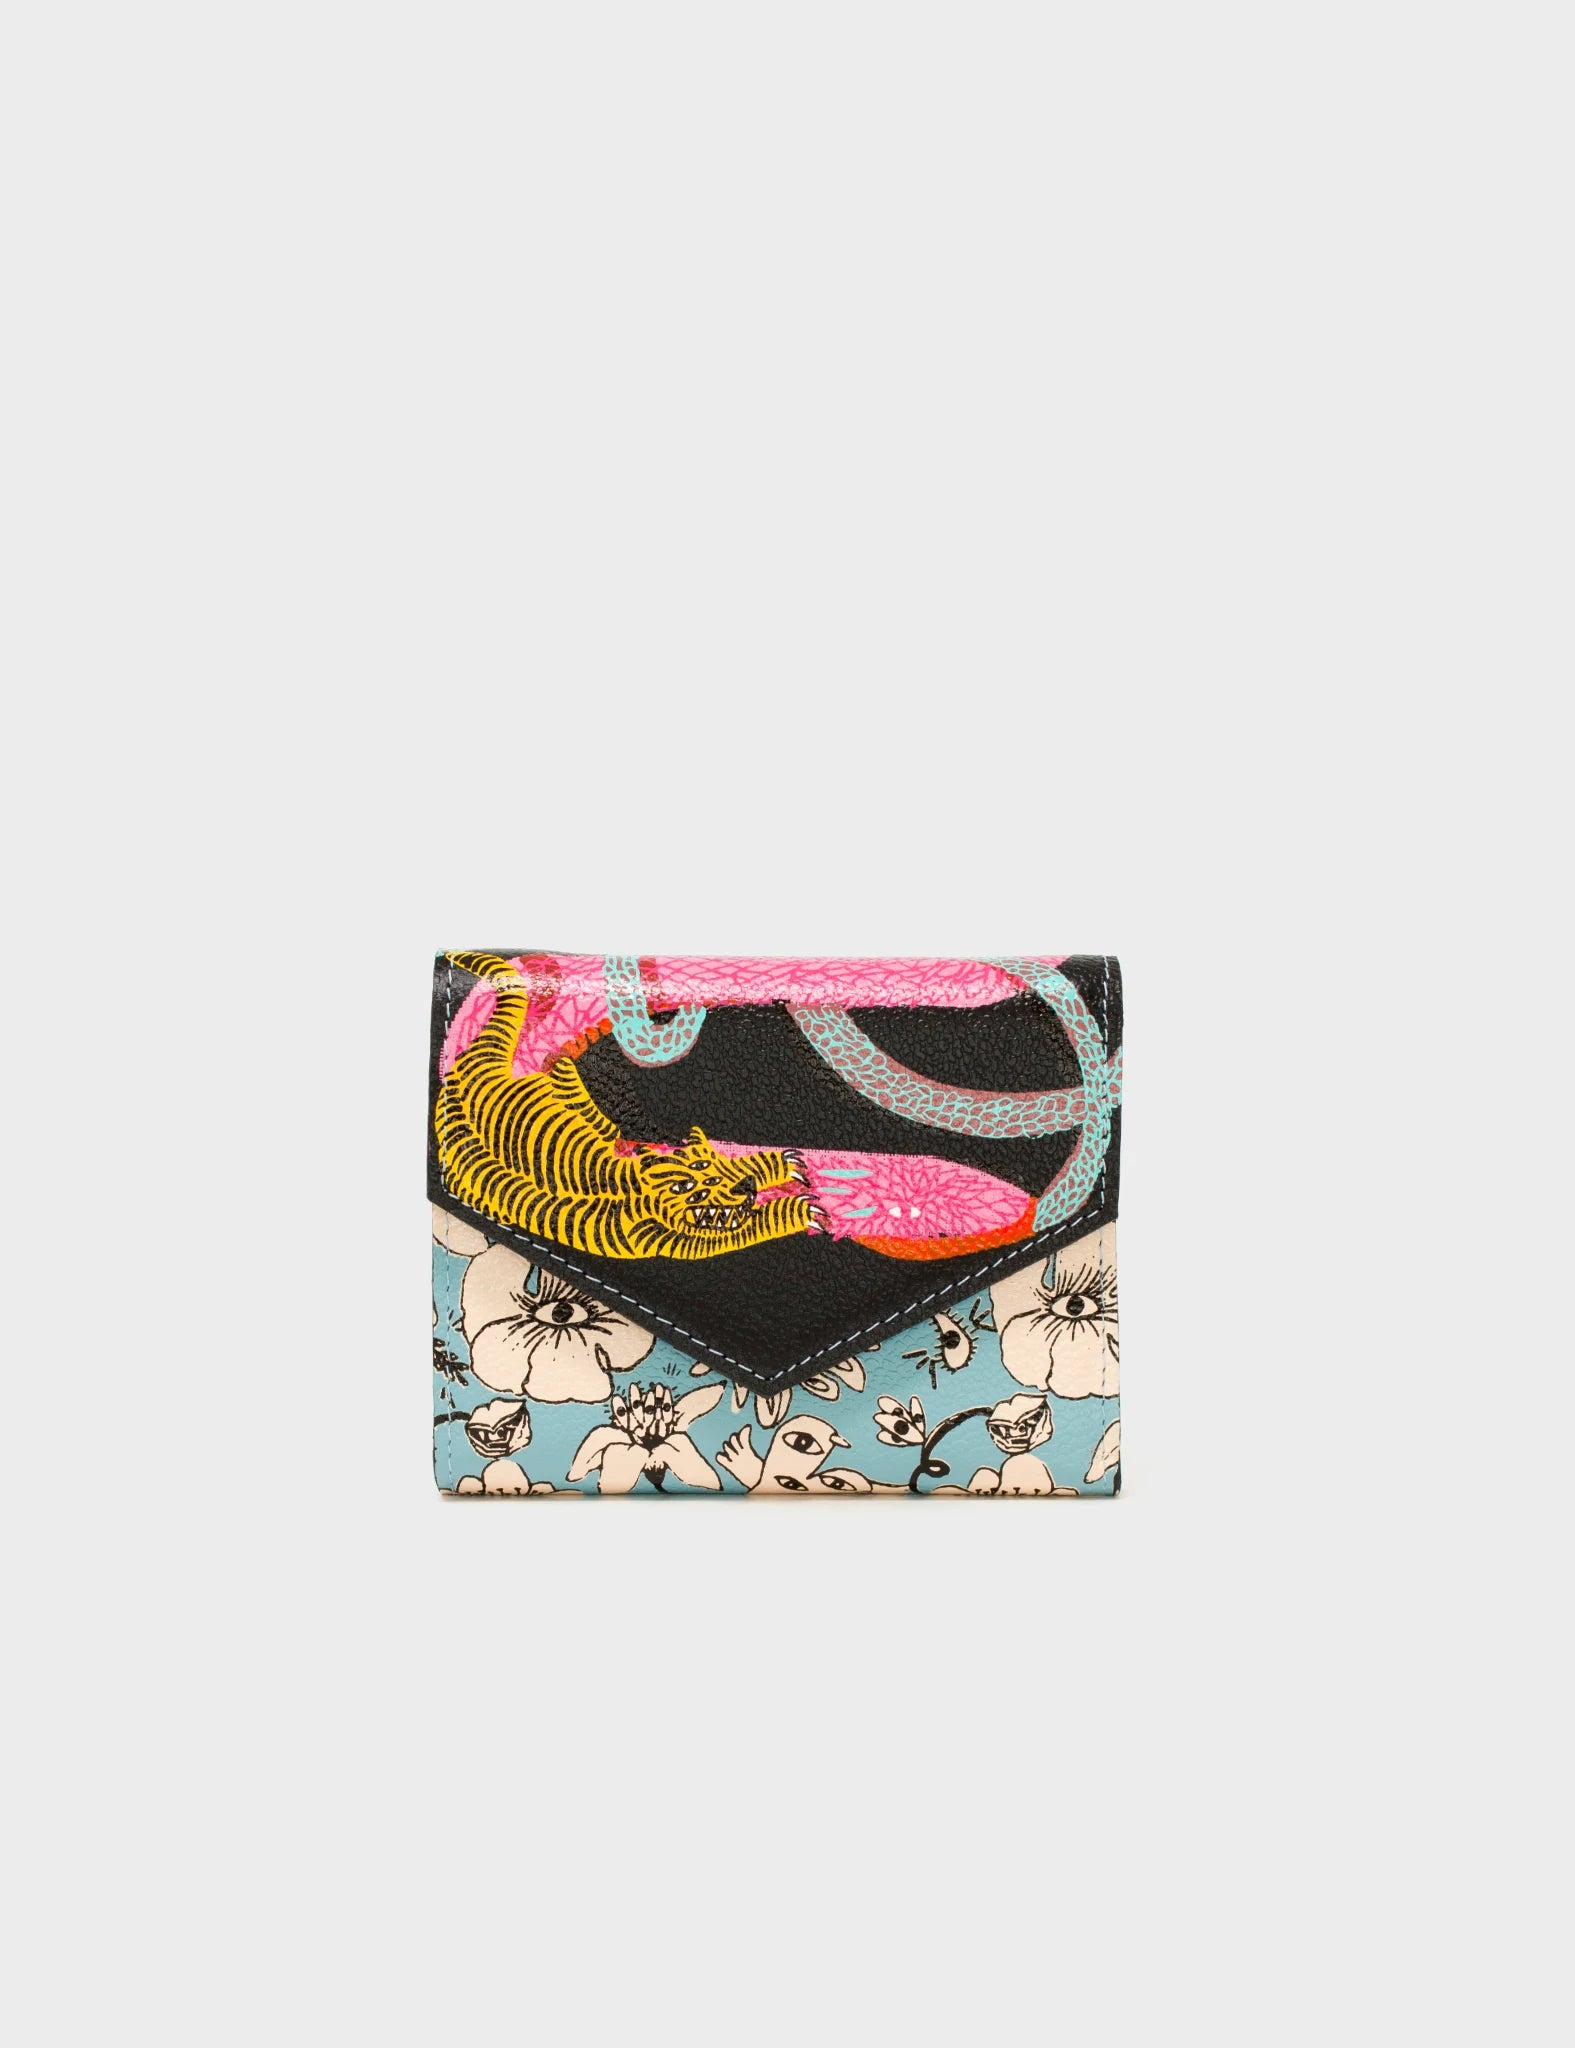 Cameo Blue Leather Wallet - Tangle, Snake and Flowers Print